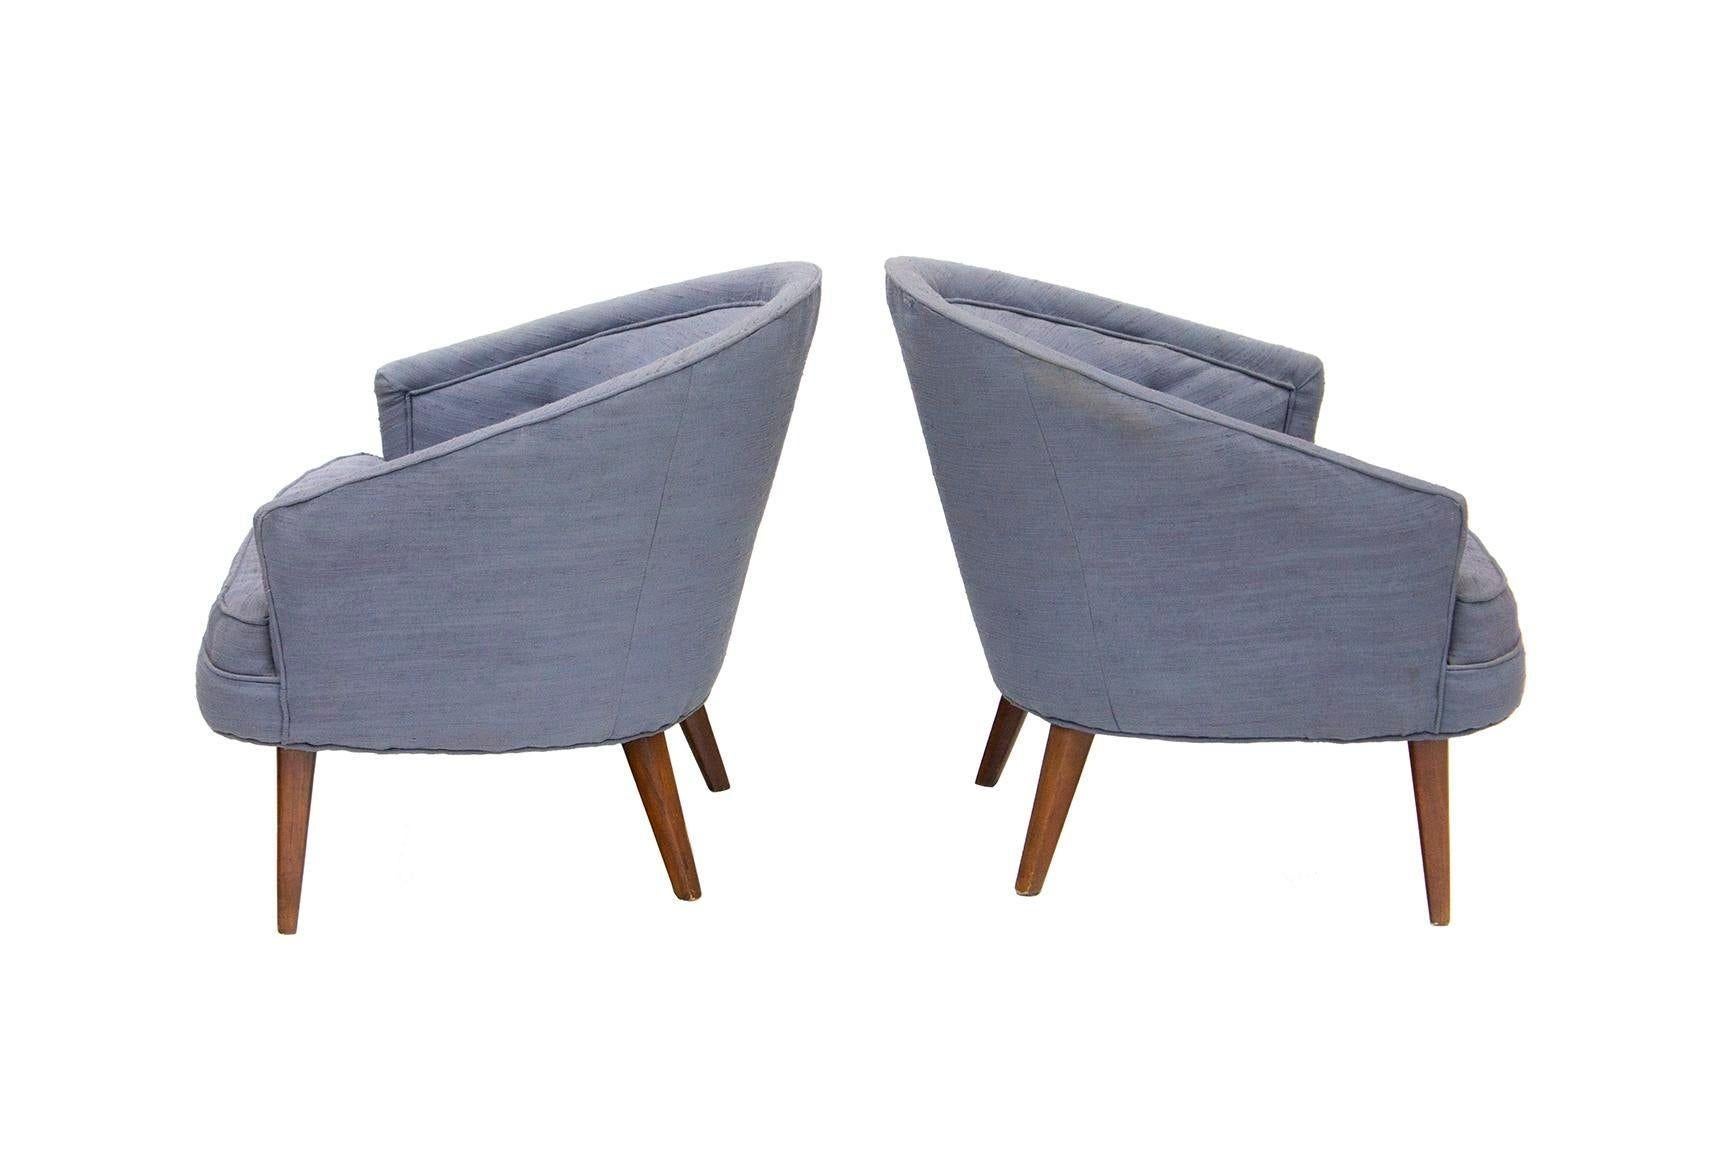 USA, 1960s
Pair of tufted midcentury armchairs in slate blue upholstery with walnut legs. These chairs are a more petite scale. Personality-filled.
DIMENSIONS: 30